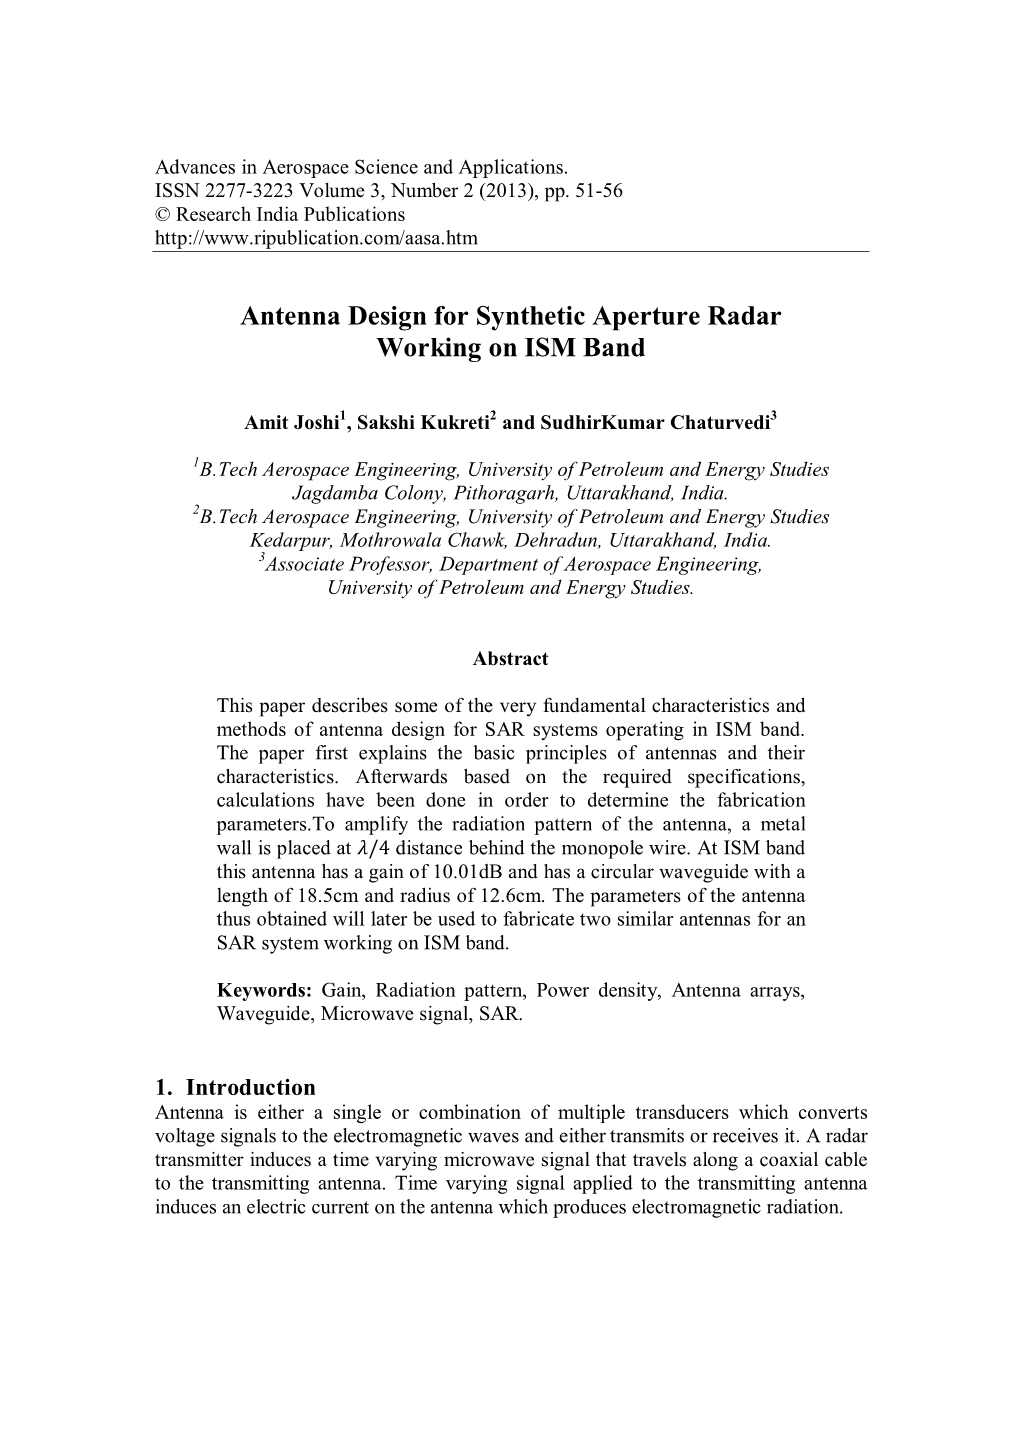 Antenna Design for Synthetic Aperture Radar Working on ISM Band